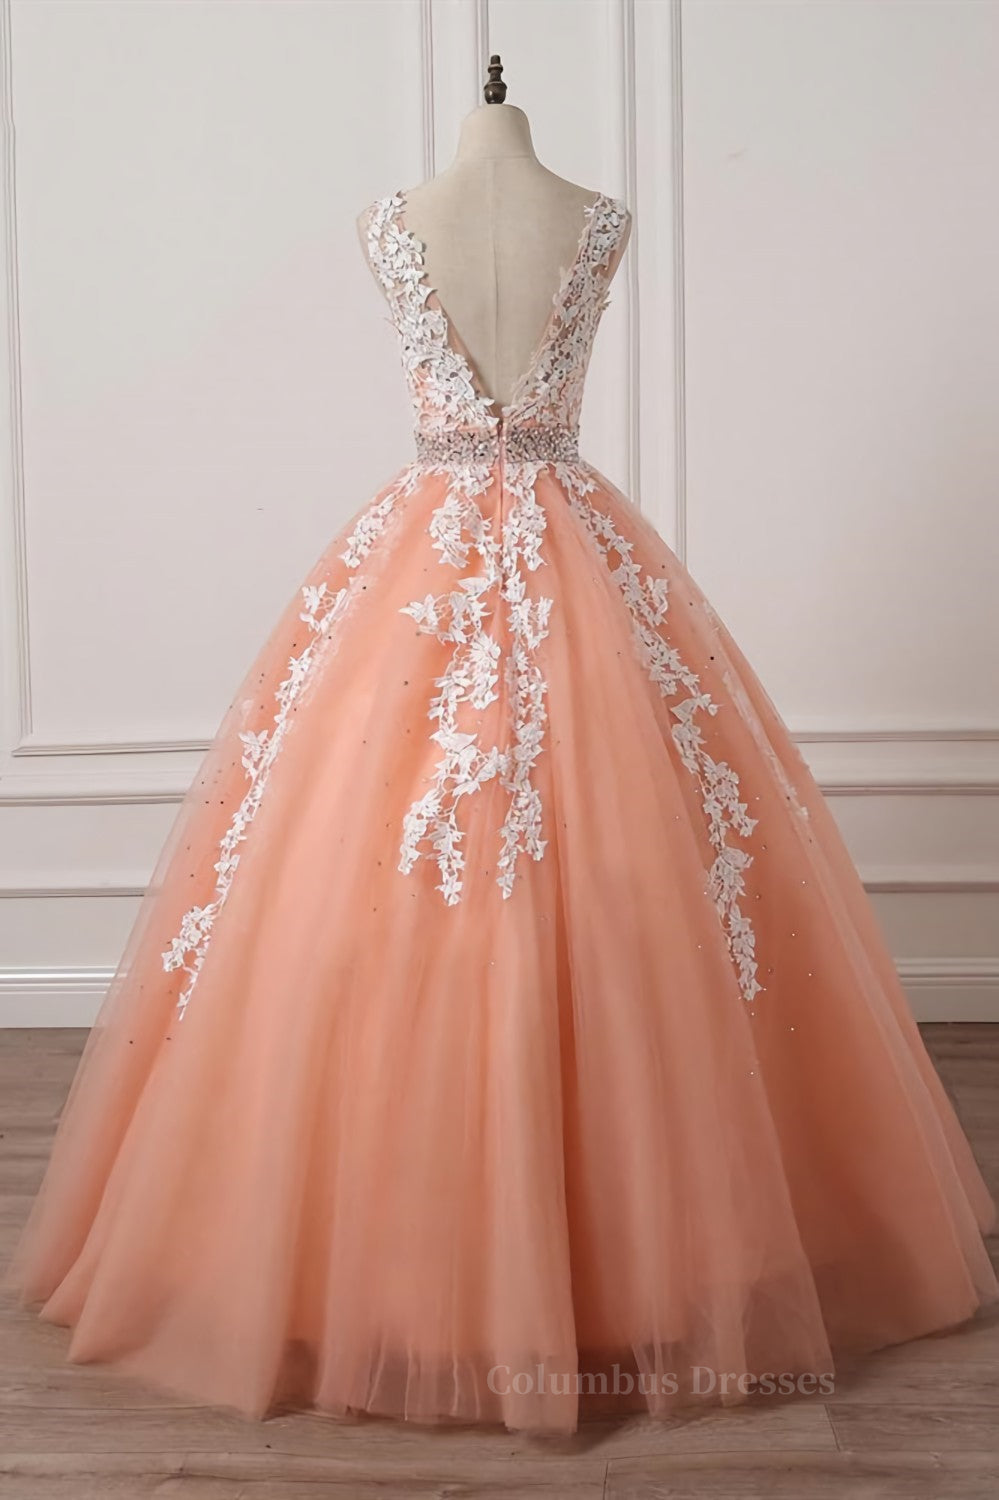 Bridesmaid Dresses Cheap, Gorgeous V Neck Open Back Coral Lace Floral Long Prom Dress, Coral Lace Formal Dress, Coral Evening Dress with Appliques